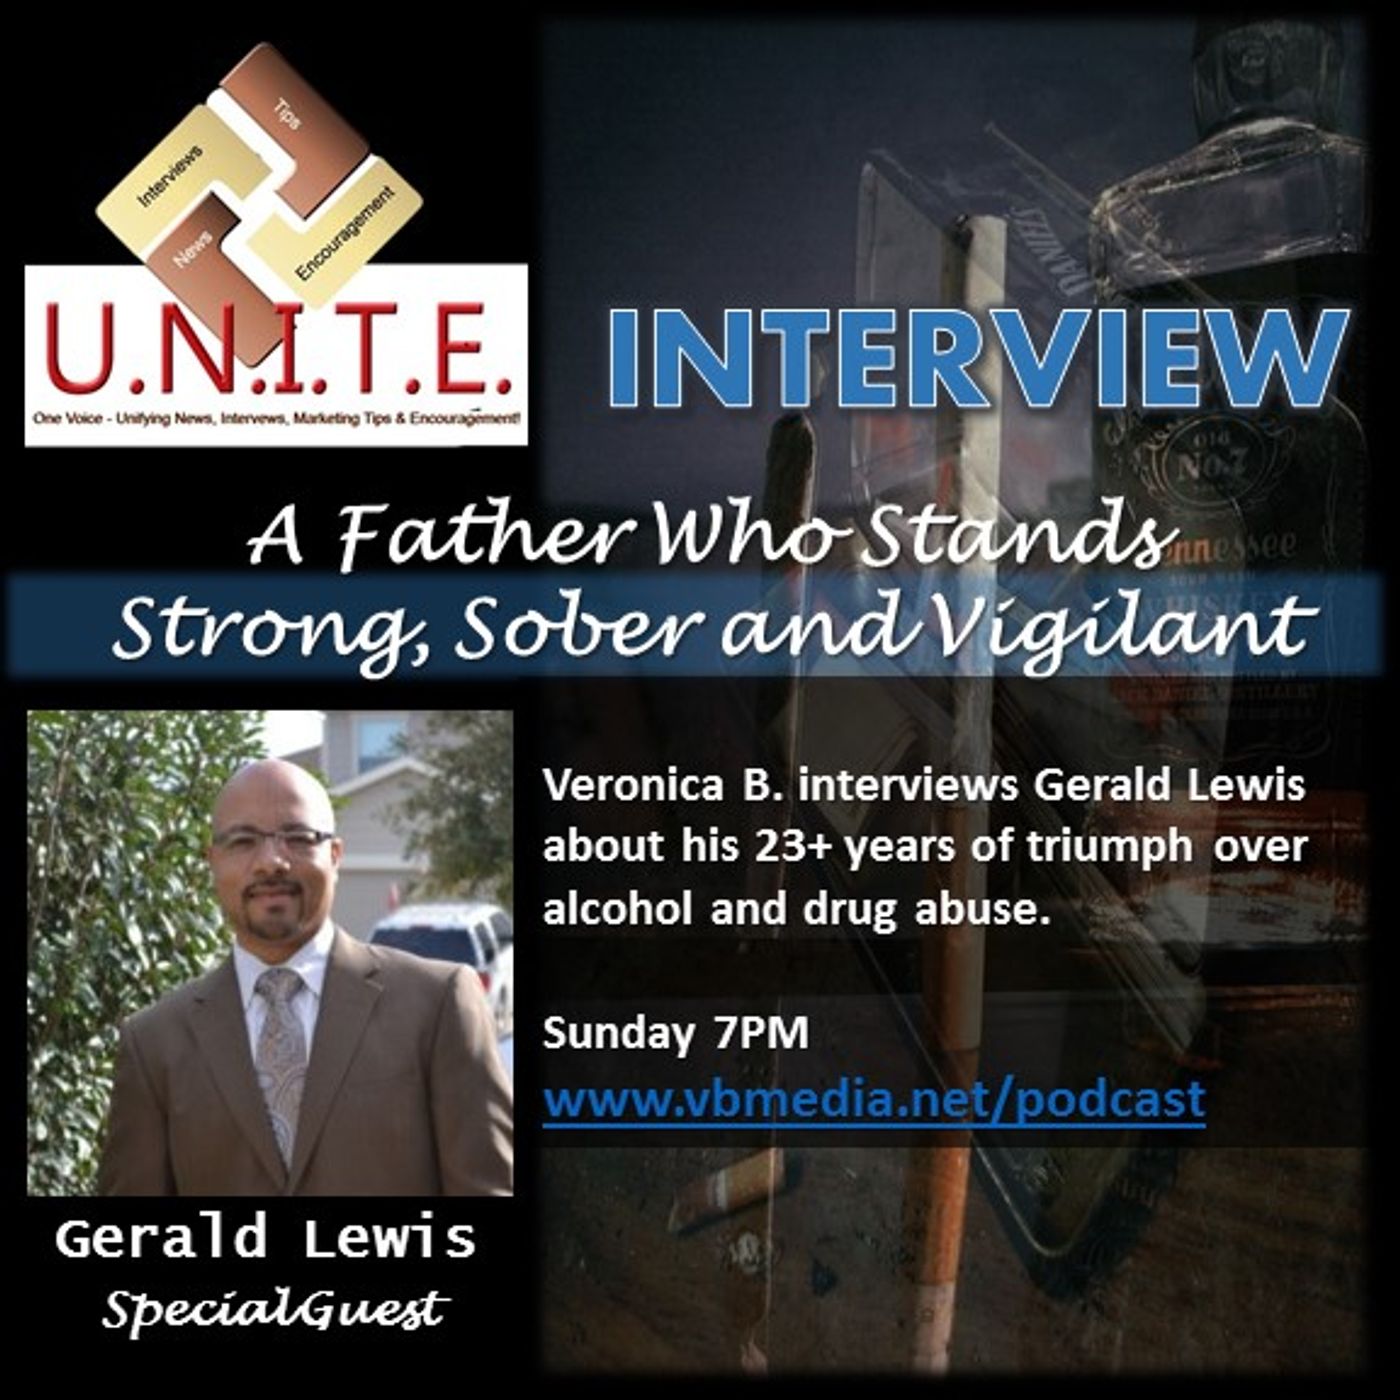 Interview with Gerald Lewis